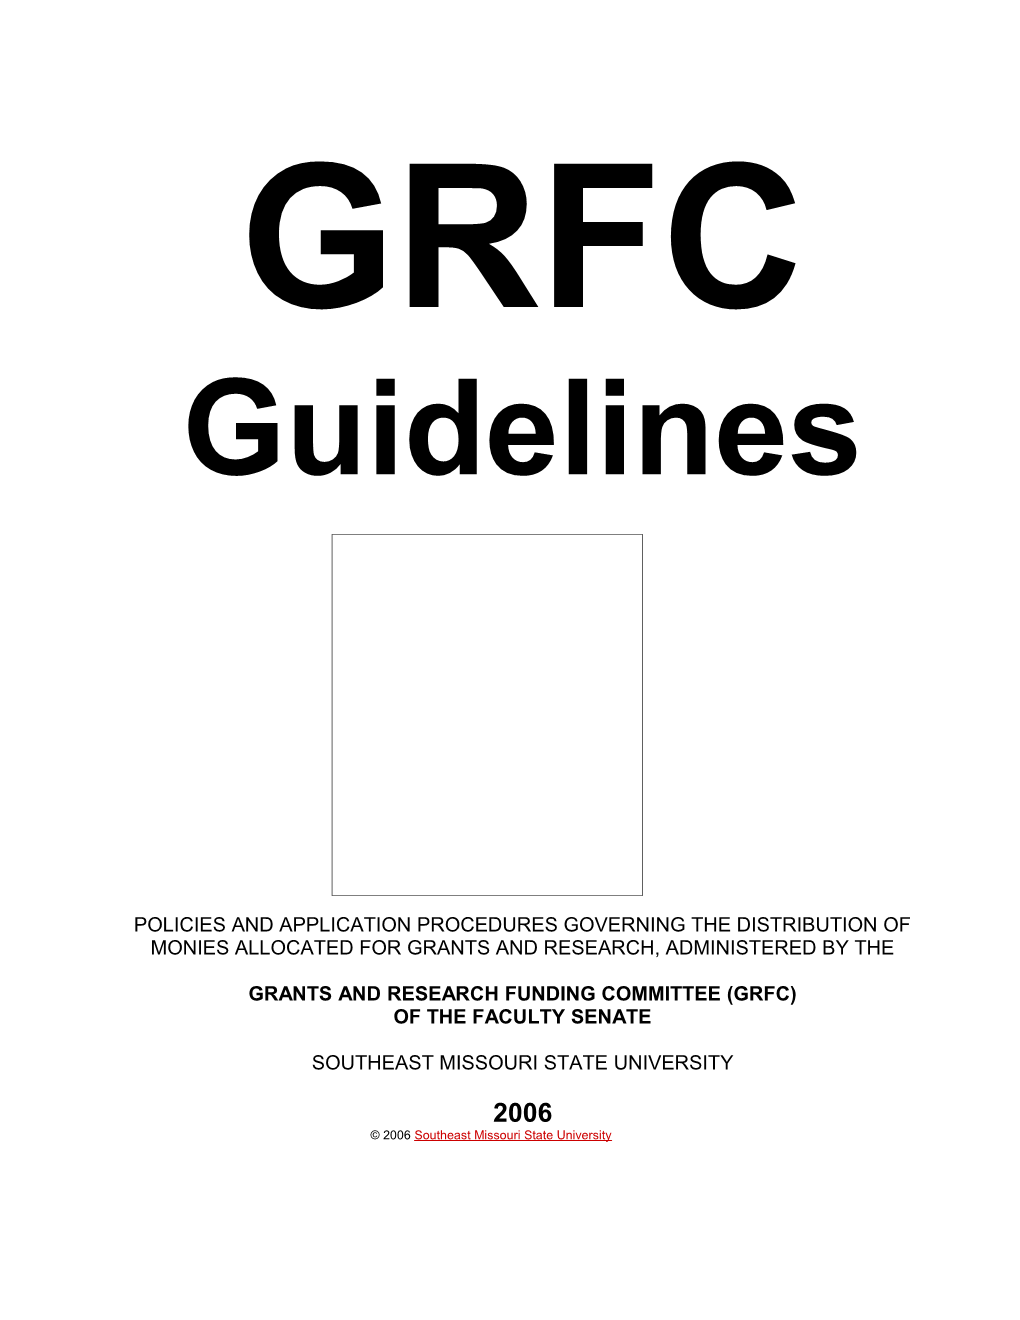 Grants and Research Funding Committee (Grfc)